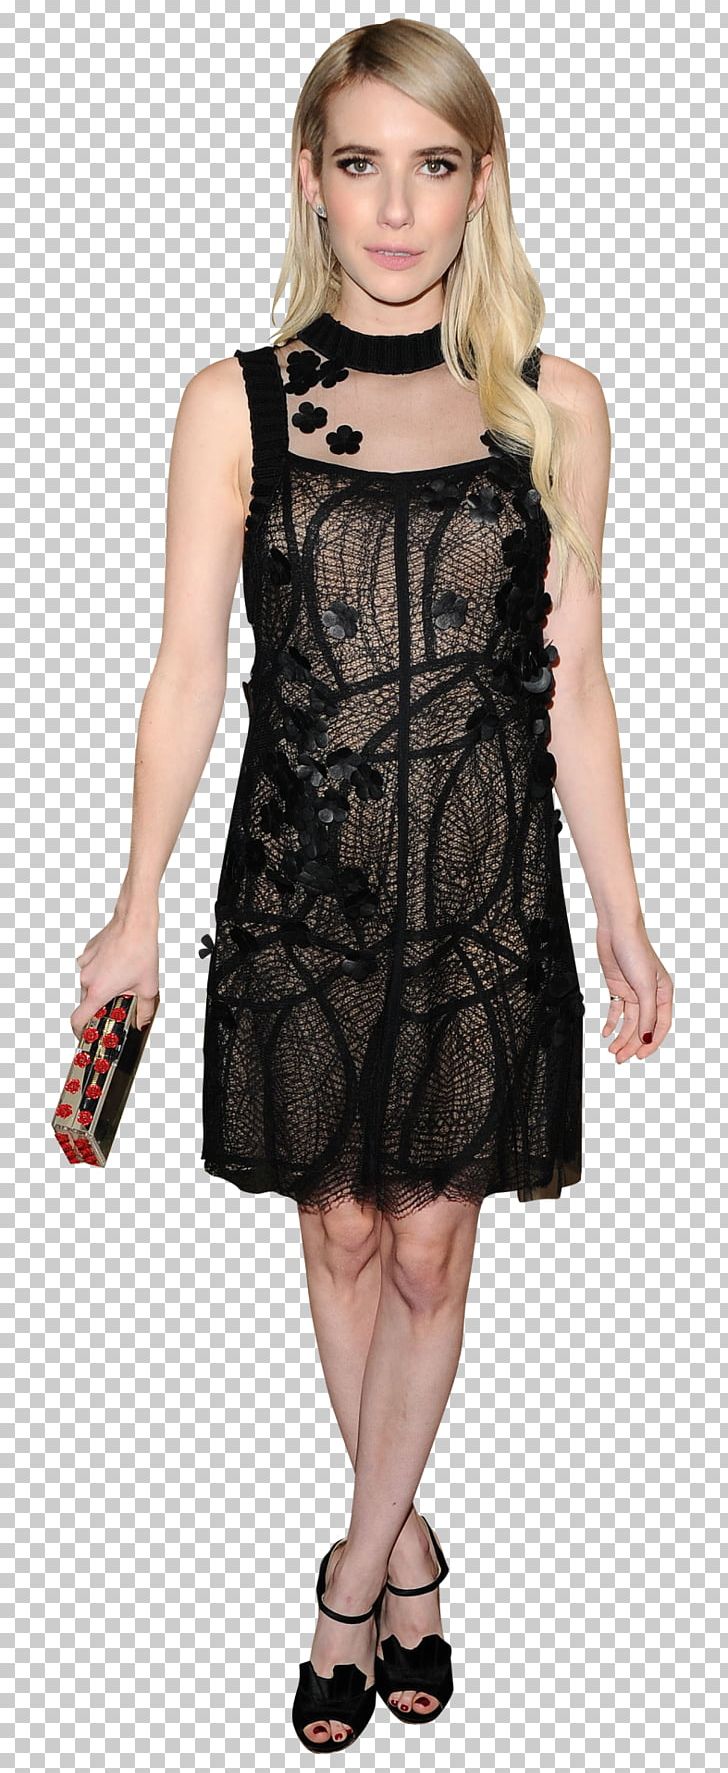 Cocktail Dress Clothing Fashion Little Black Dress PNG, Clipart, 5 Seconds Of Summer, 5sosfam, Amazoncom, Ashton Irwin, Celebrities Free PNG Download